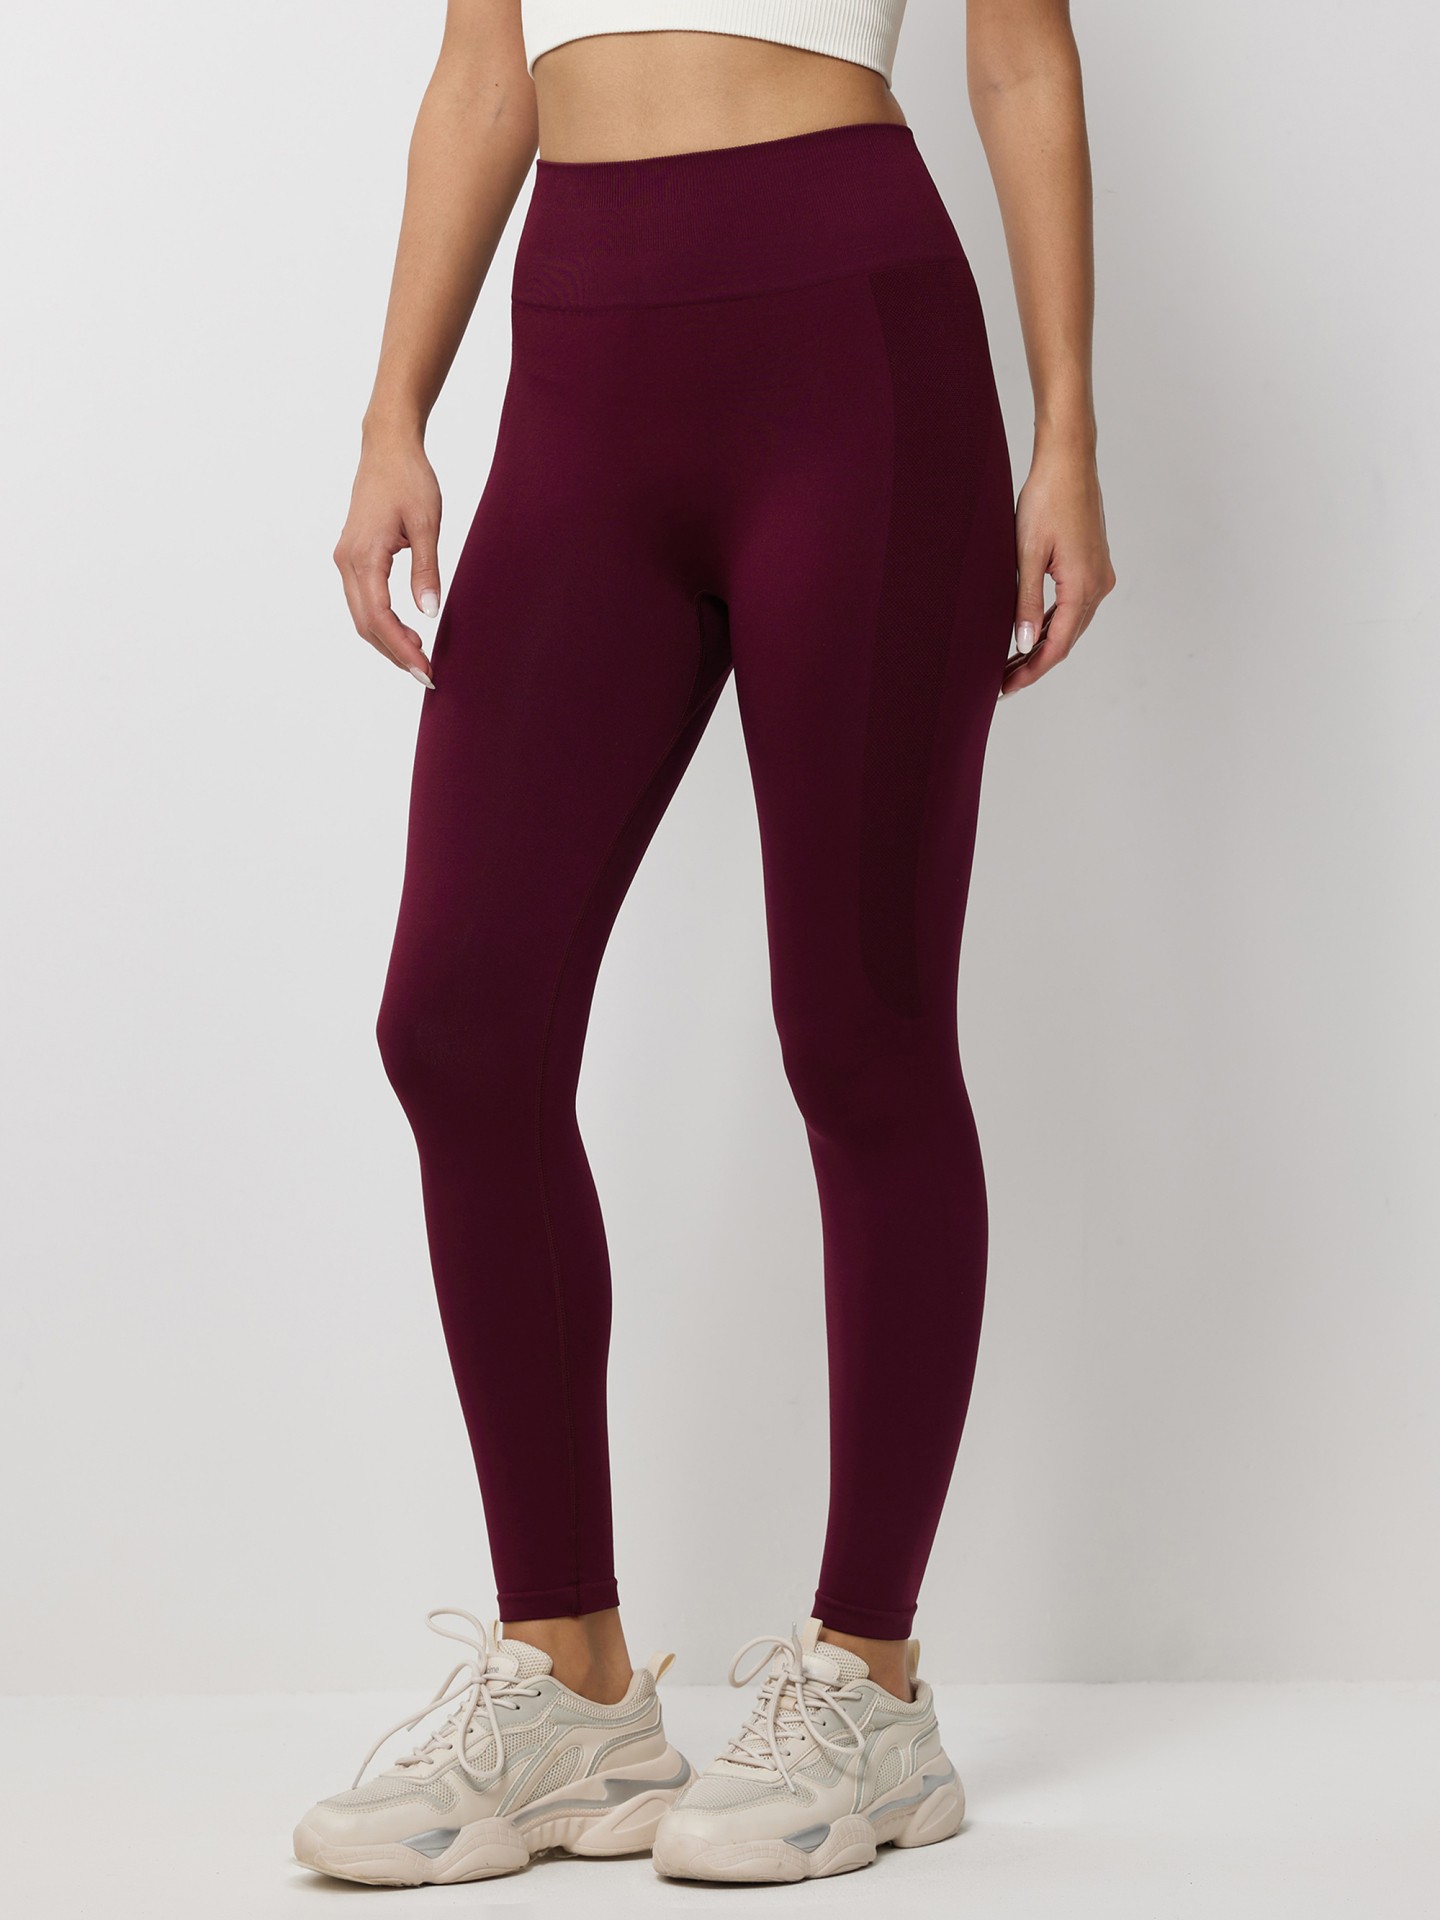 SOLD OUT bombshell sports wear leggings Thigh Highs Solid MAROON medium